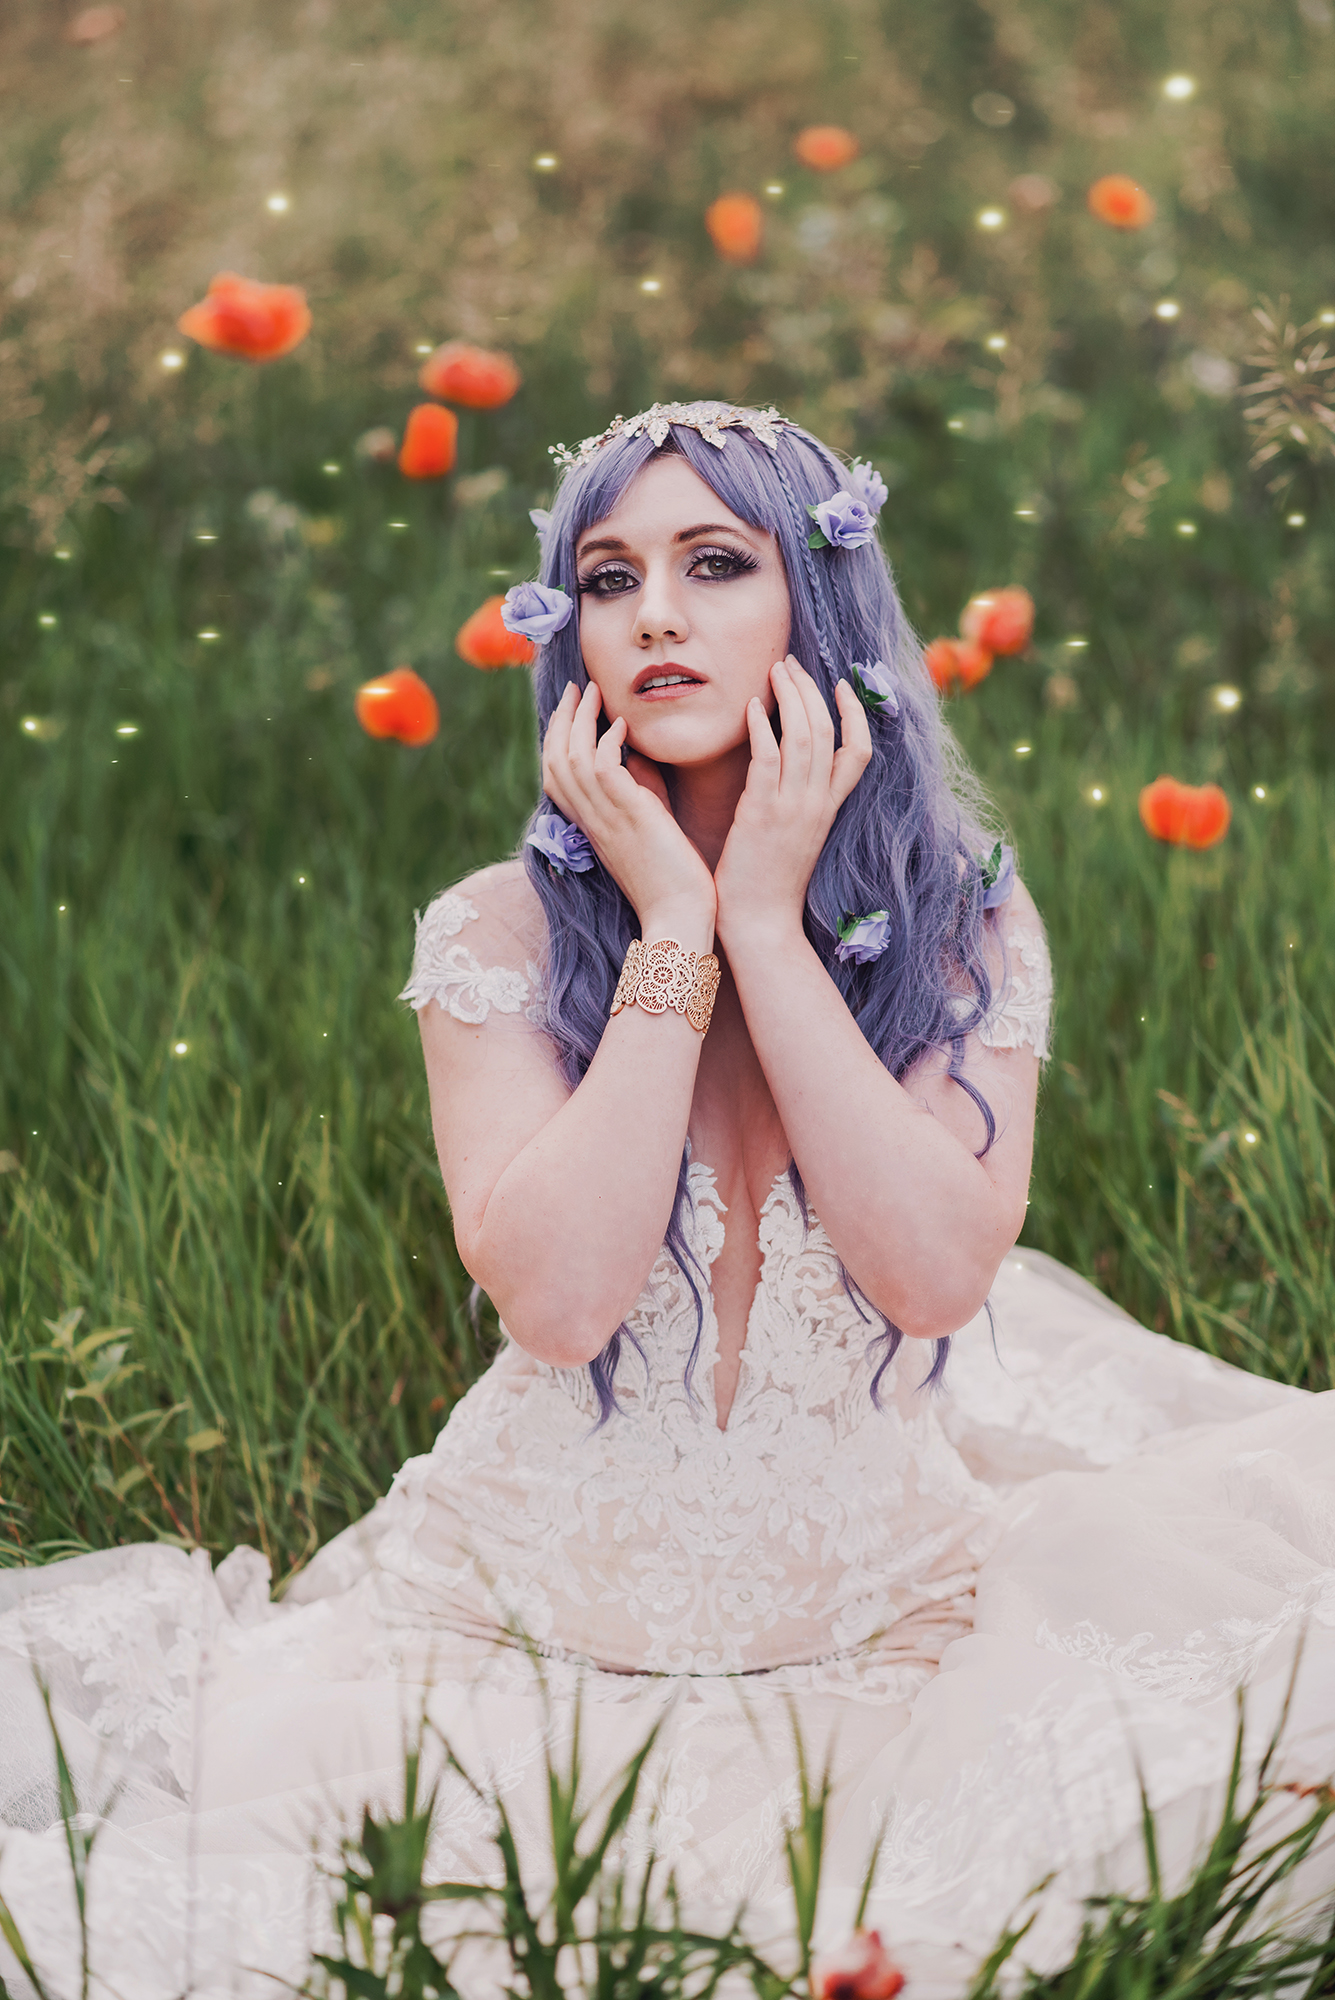 A woman in a white dress with lavender hair sits in a grassy field with red flowers in the background.